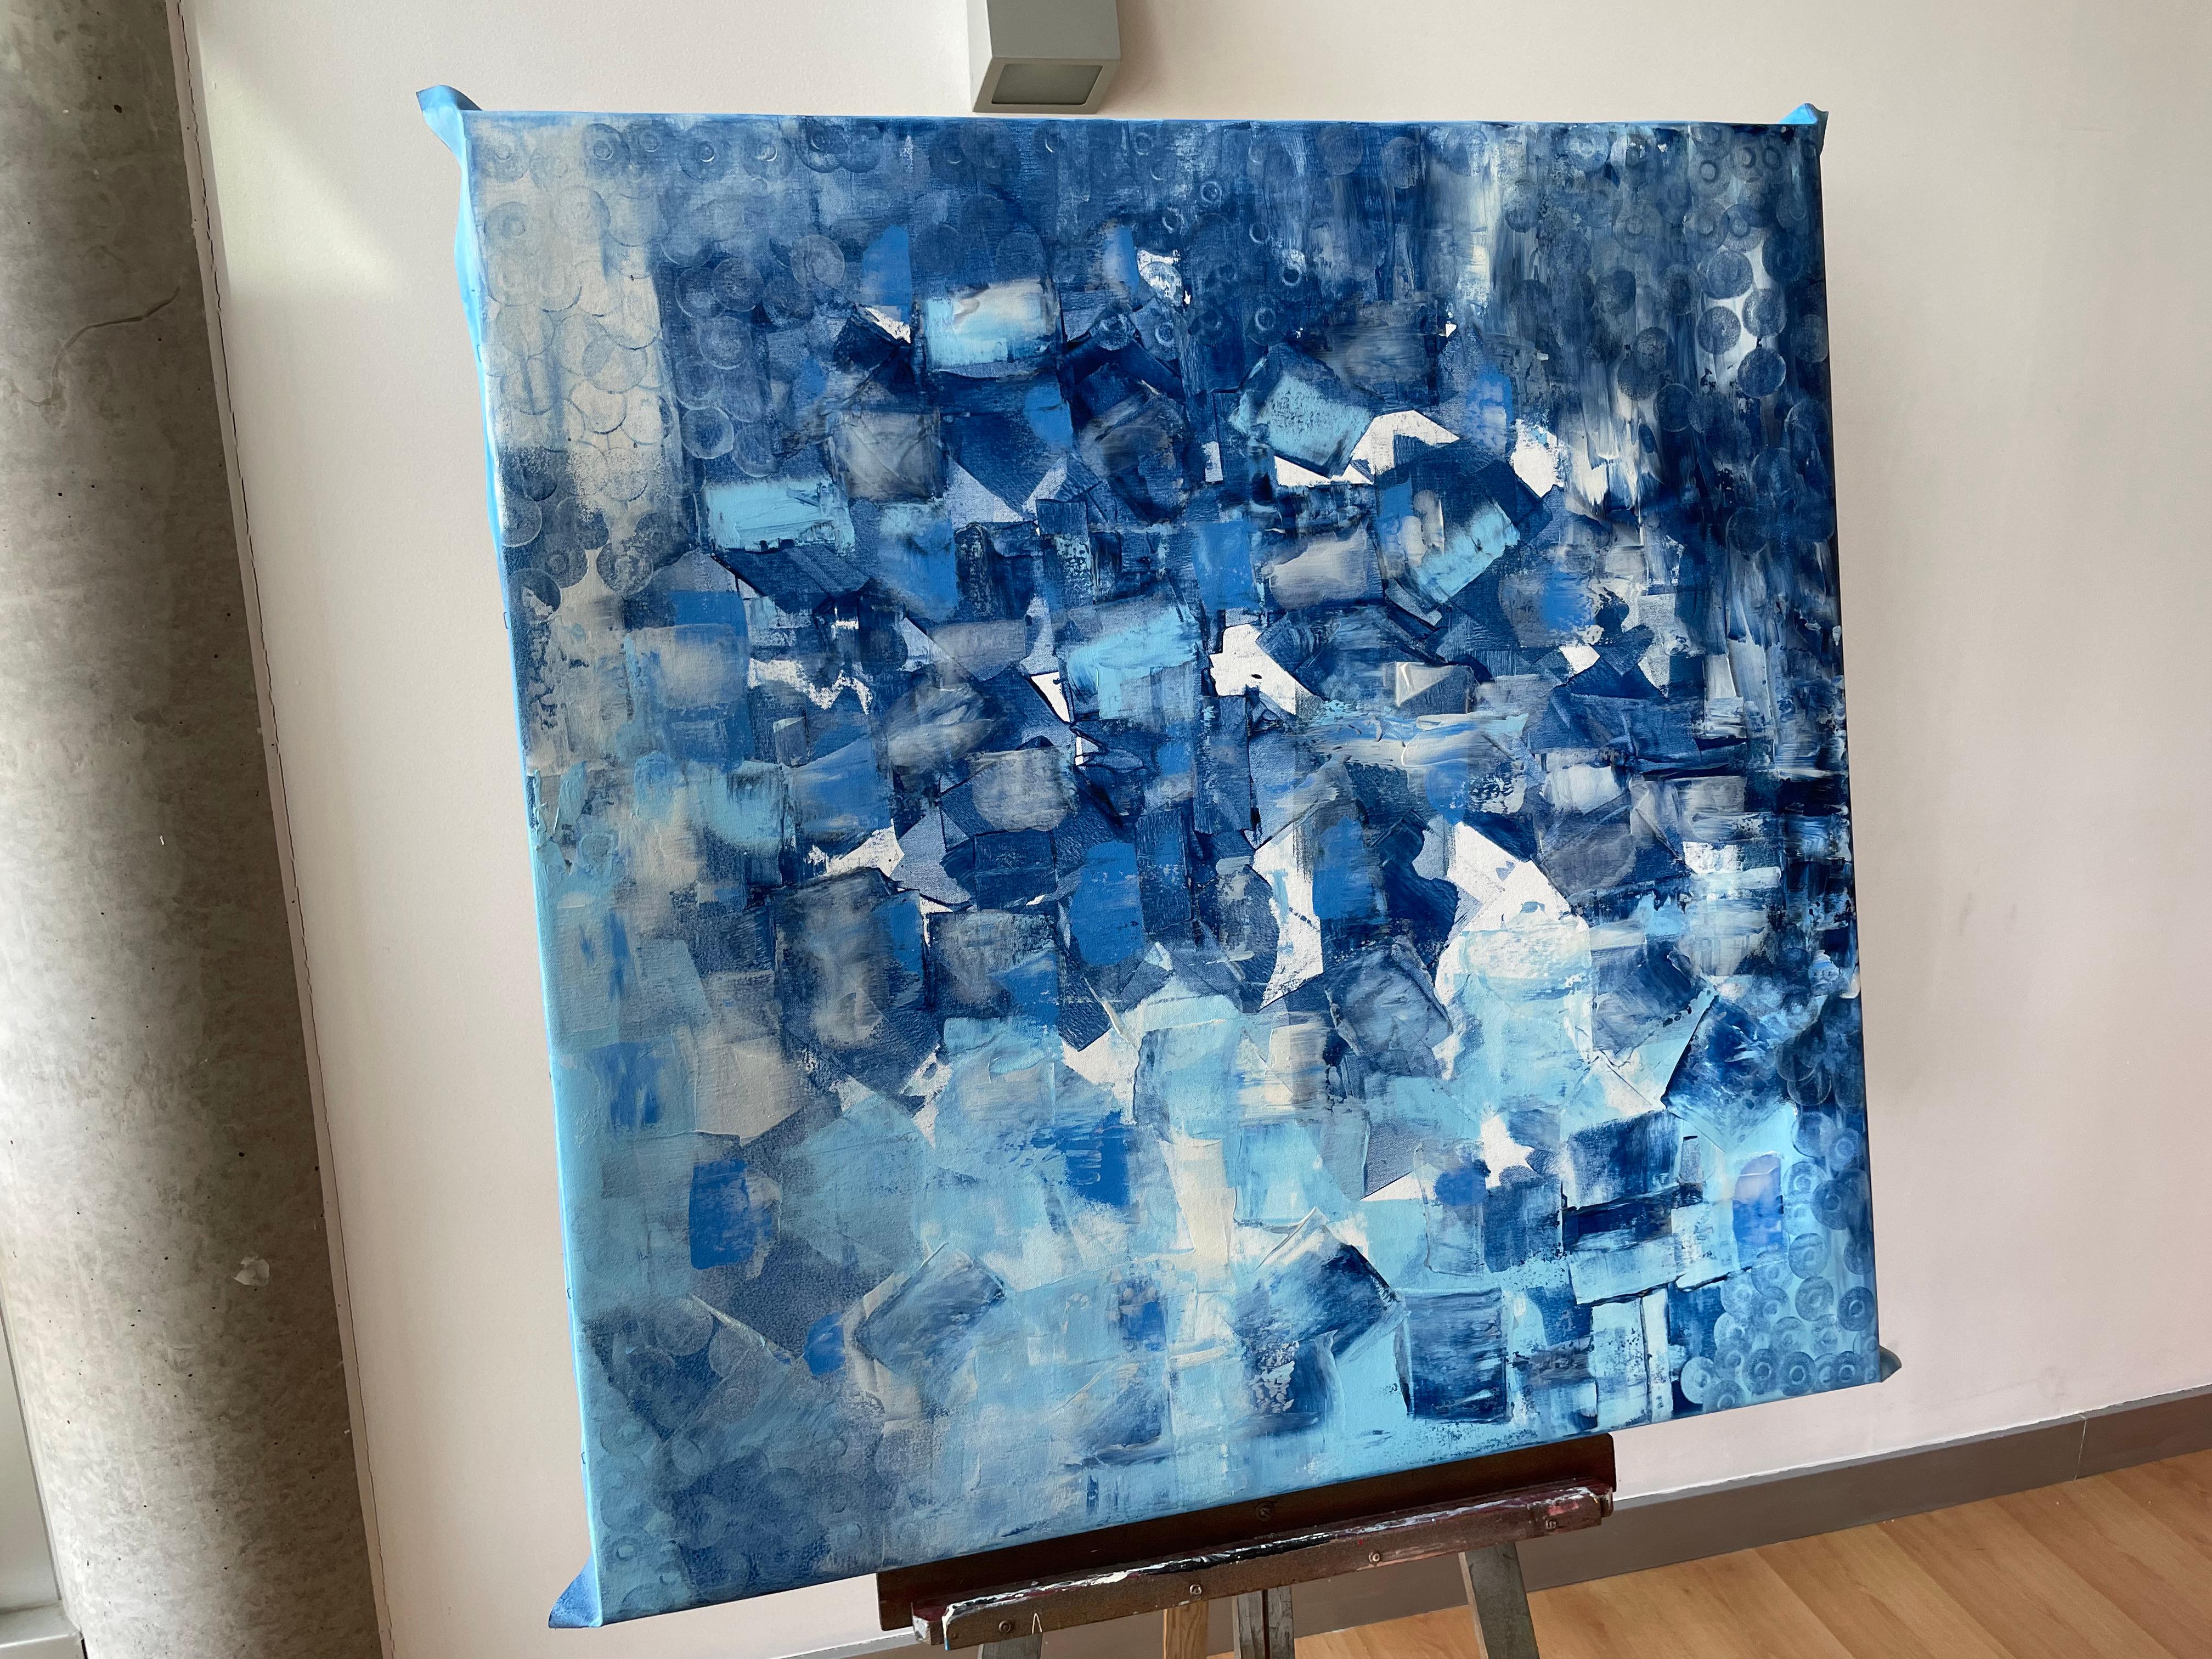 Abstraction in Blue and White

On the vast canvas of this abstract painting, the viewer is immersed in a deep exploration of blue and white tones that unfold with impressive elegance and serenity. The selected color palette evokes a feeling of calm